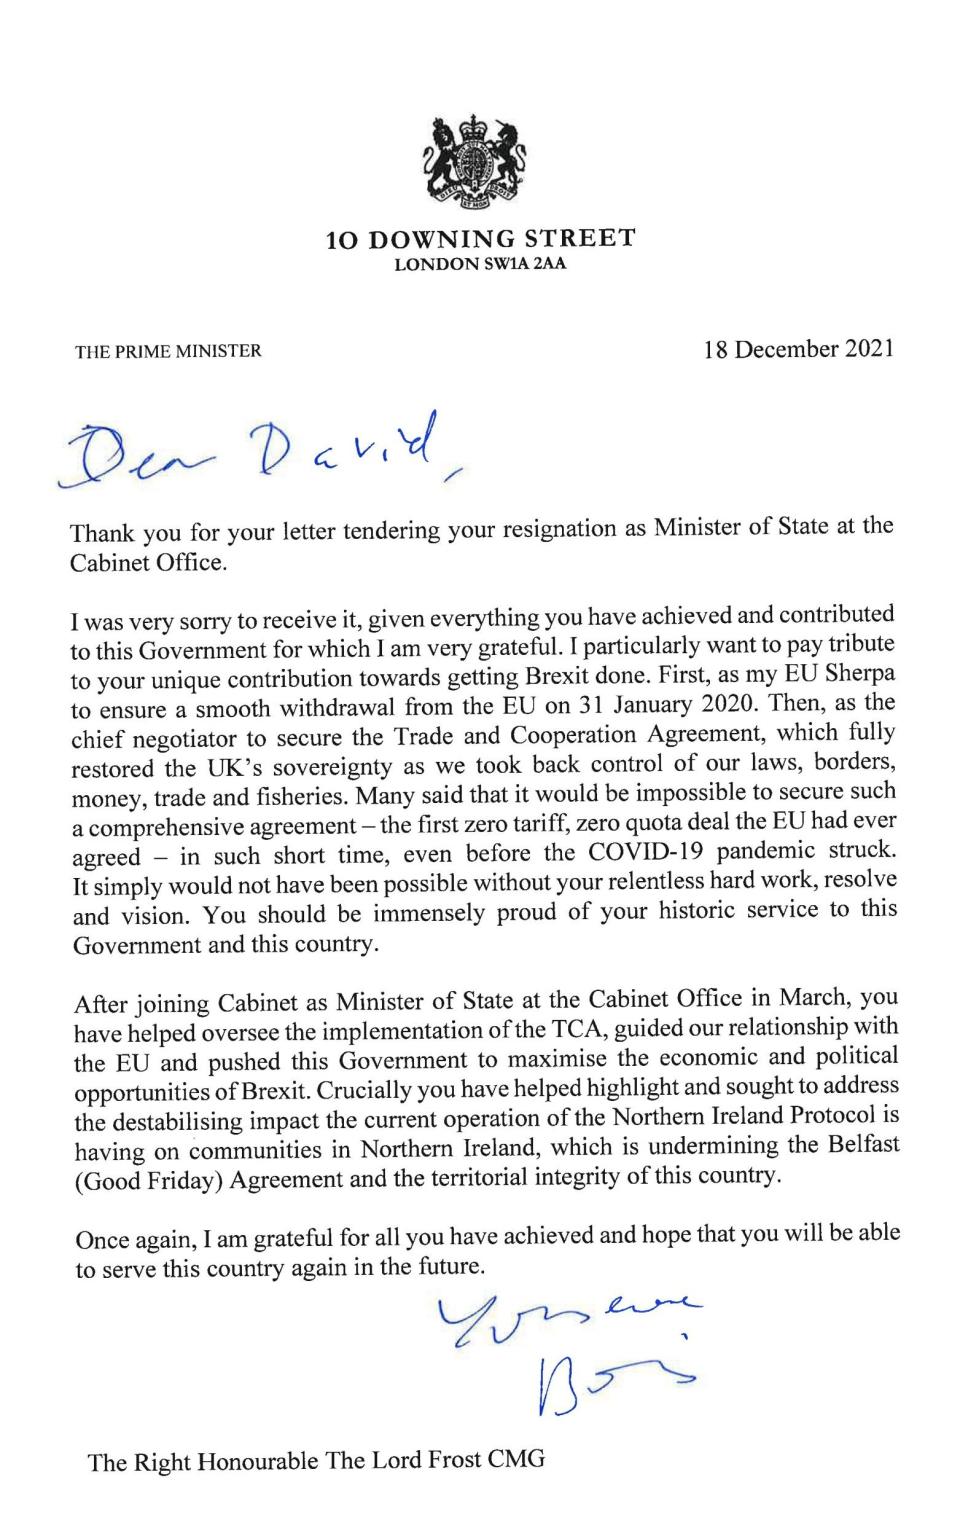 Boris Johnson's response to Lord Frost's resignation was also released by No 10 on Saturday night - 10 Downing Street